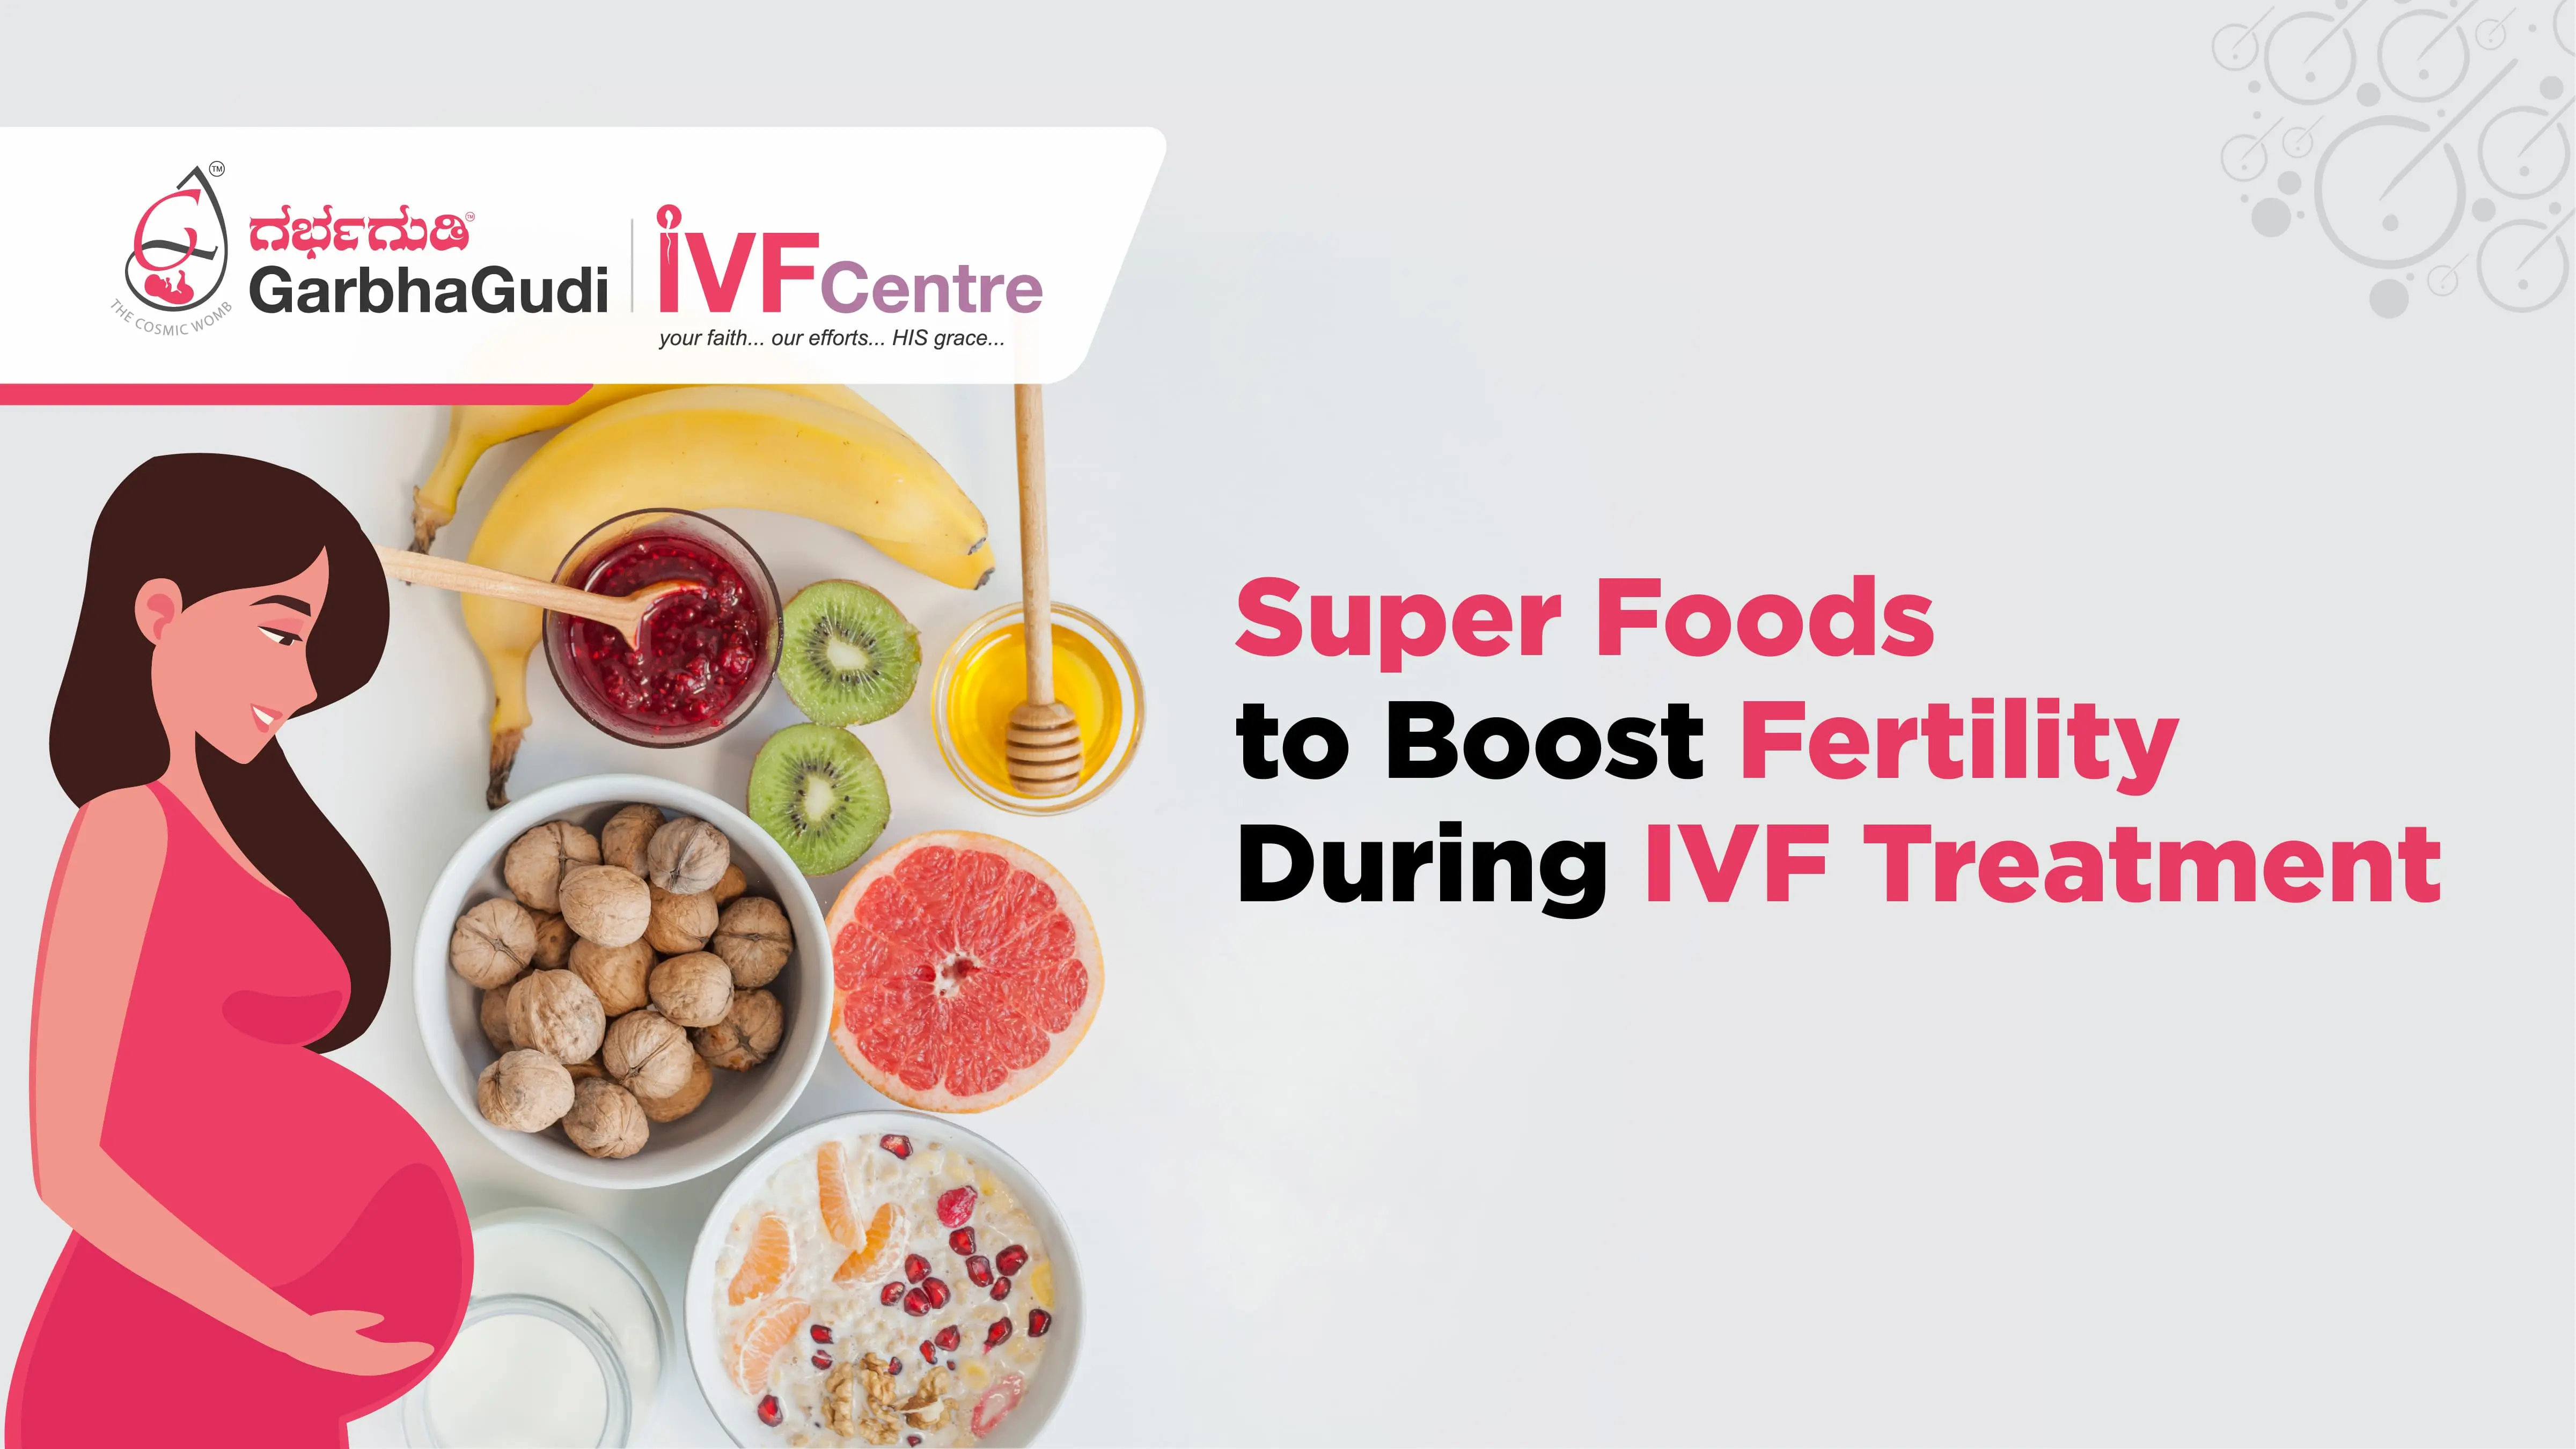 Super Foods to Boost Fertility During IVF Treatment